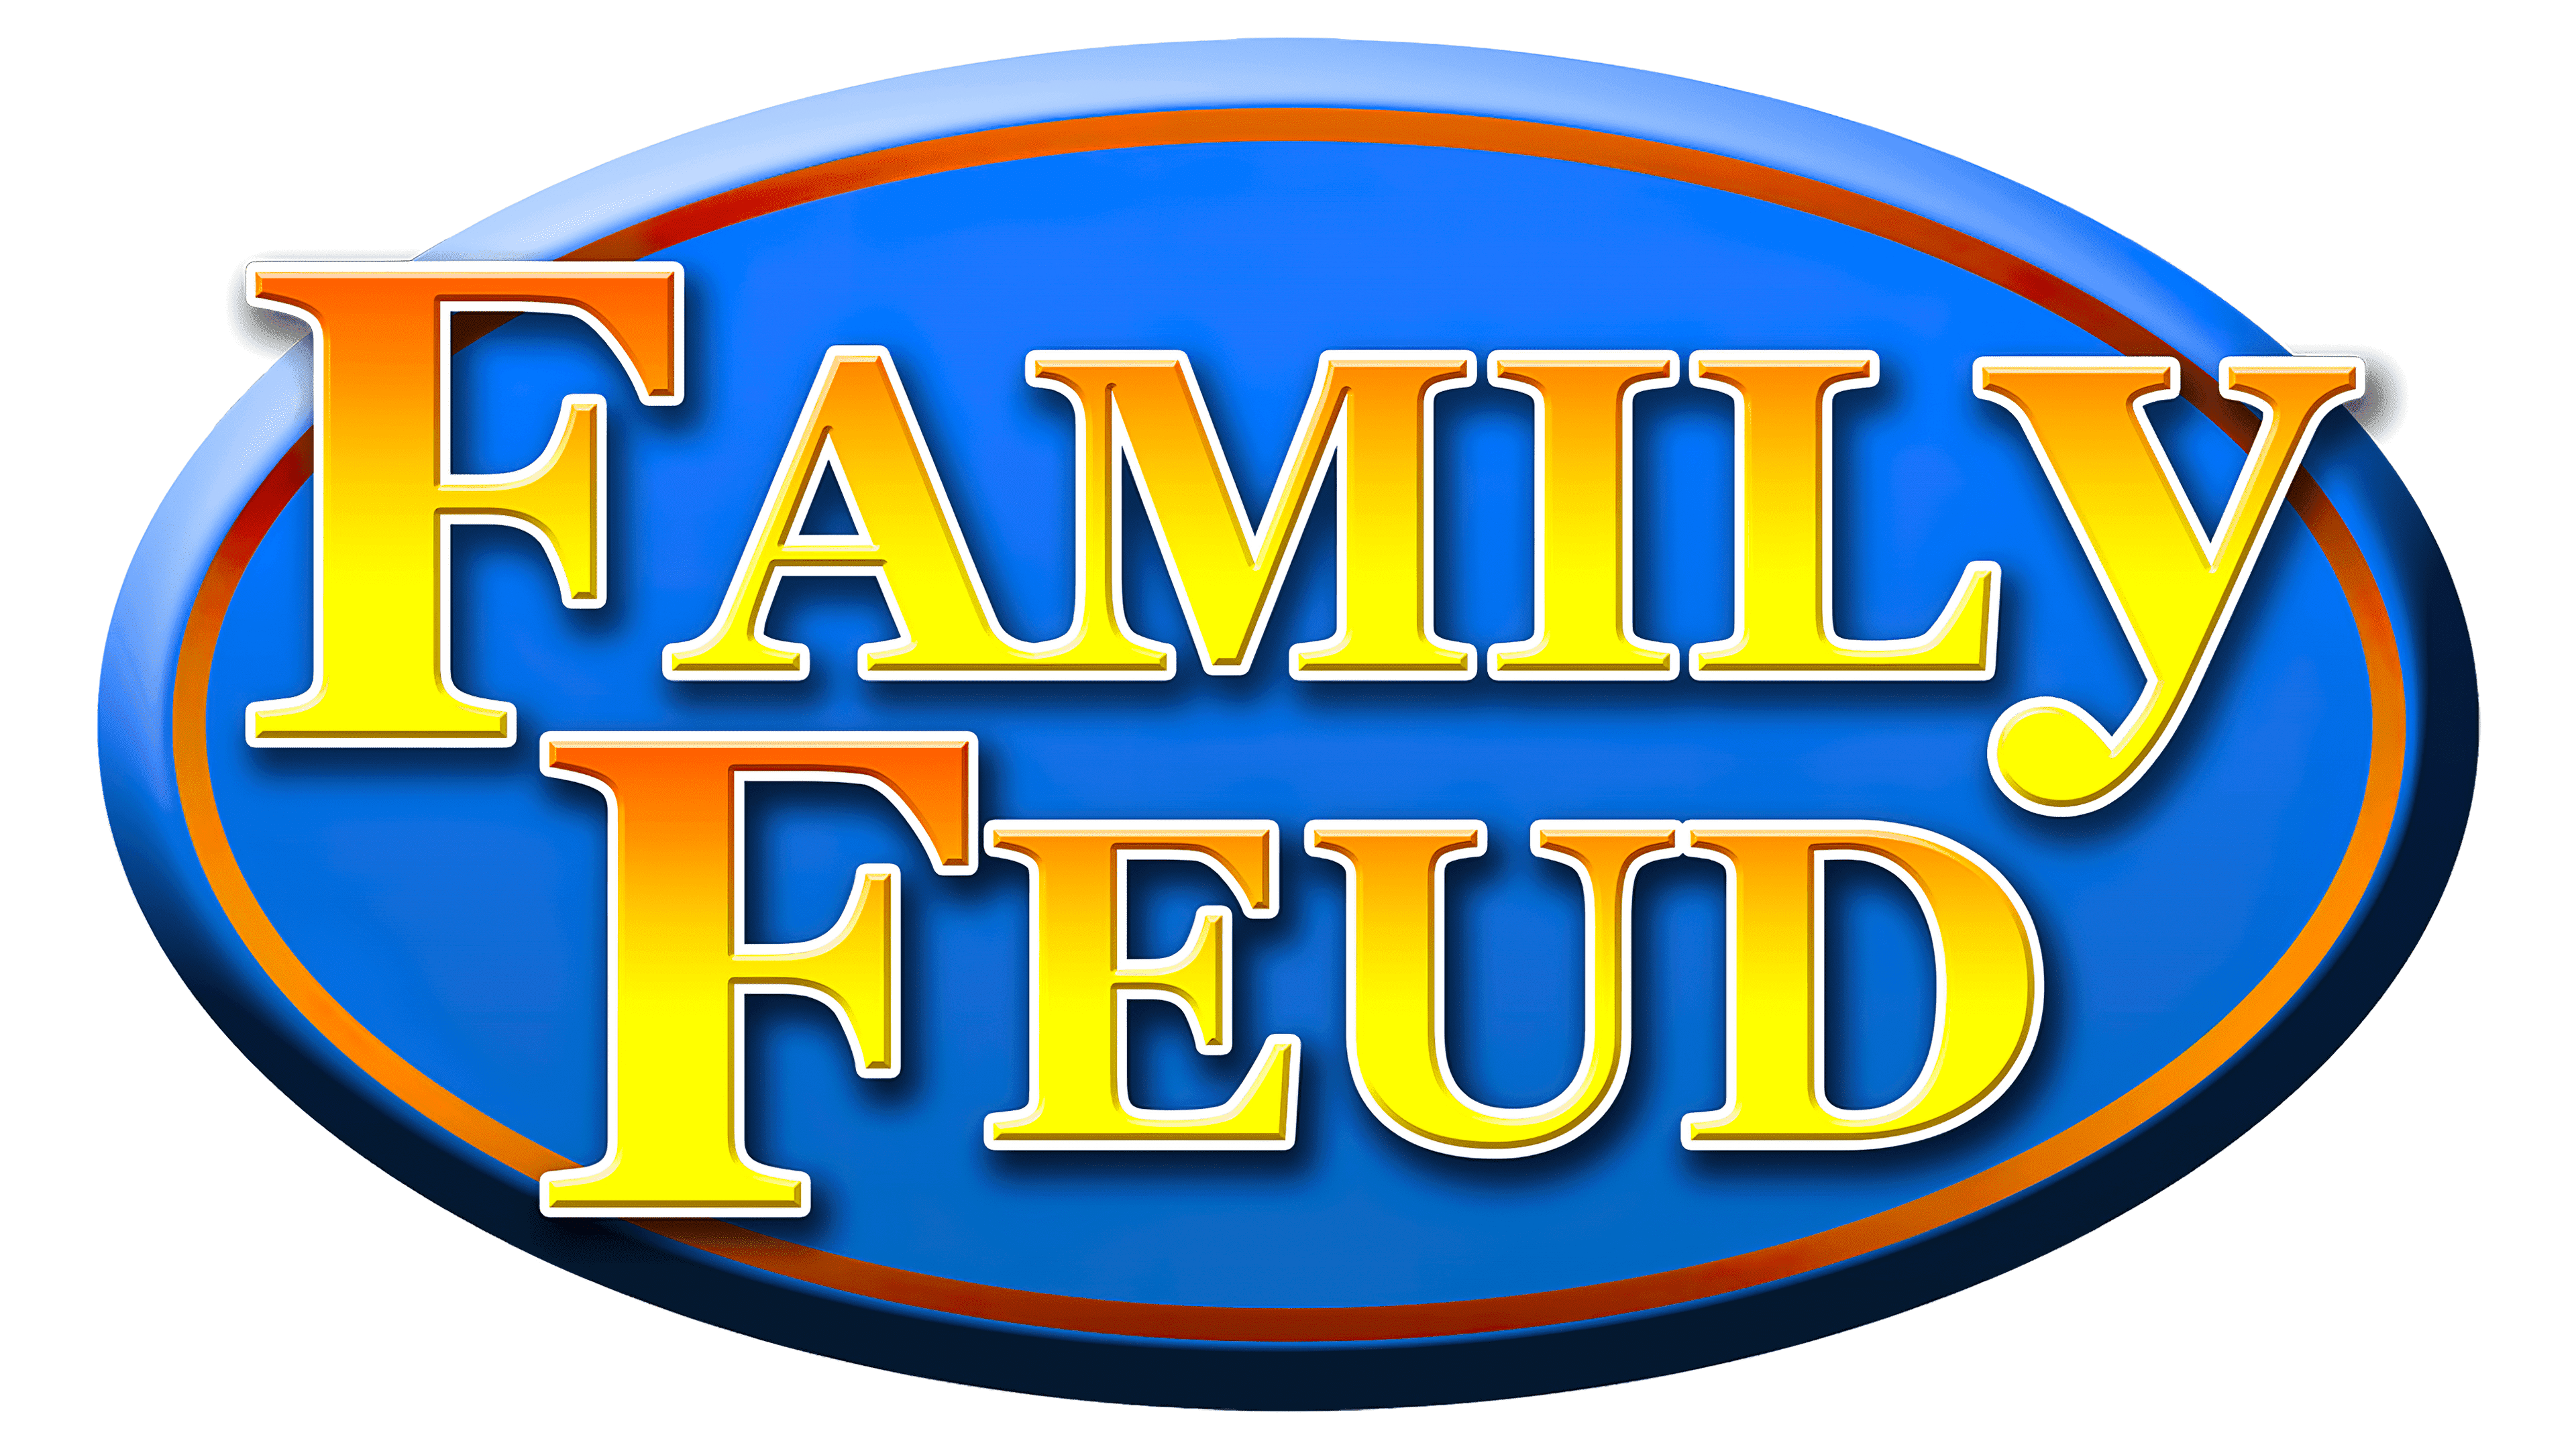 family-feud-logo-symbol-meaning-history-png-brand